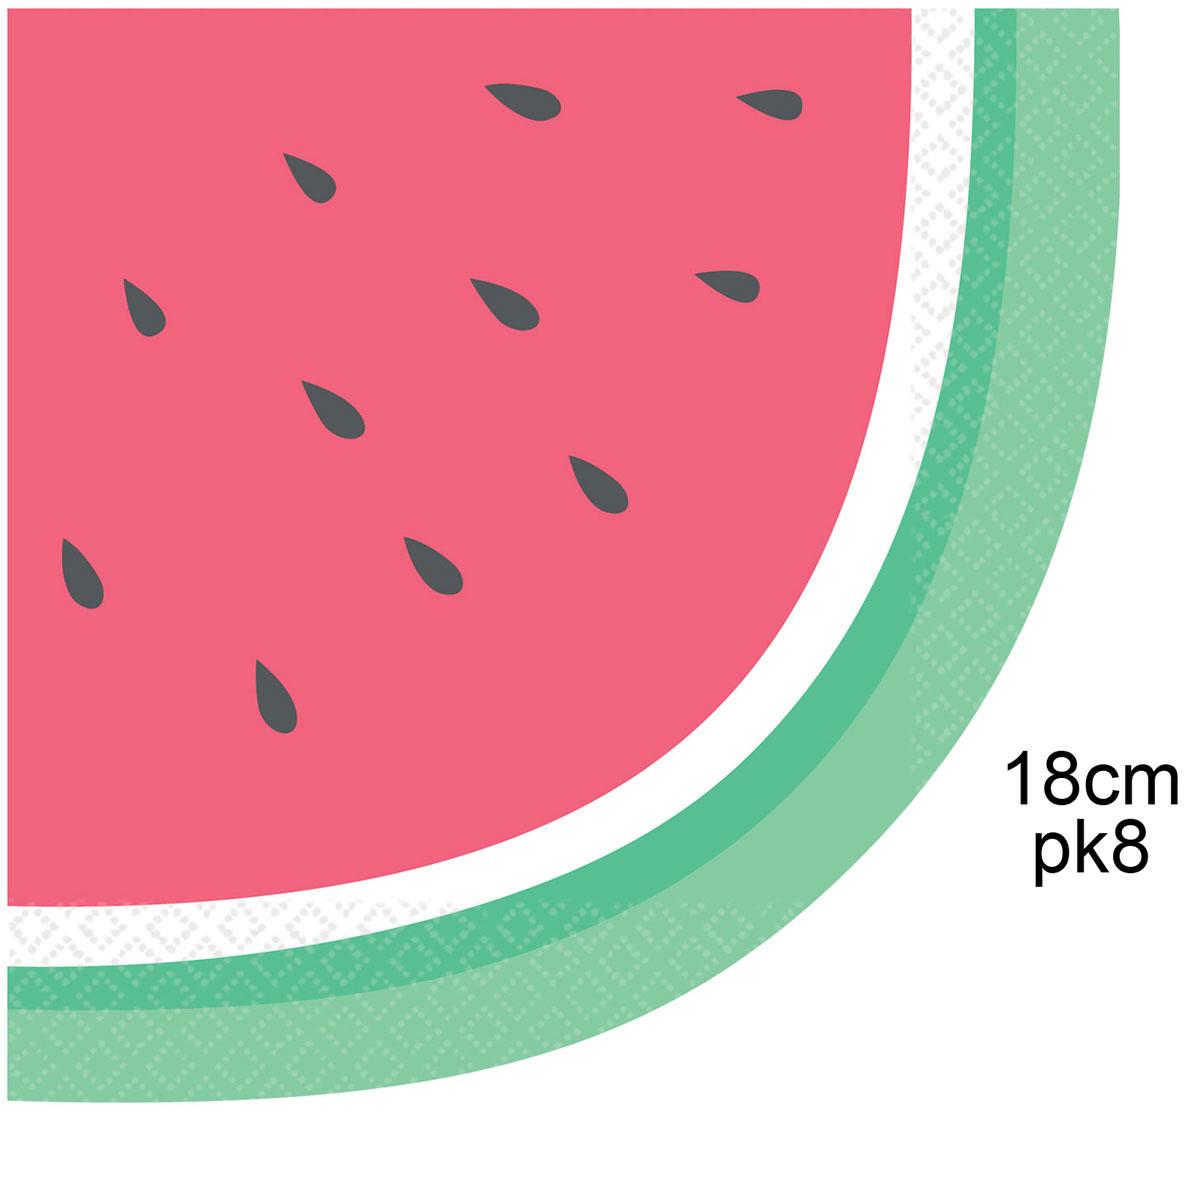 Just Chillin Fruit Salad Water Melon Die-cut Napkins pk16 by Amscan 512759 available here at Karnival Costumes online party shop